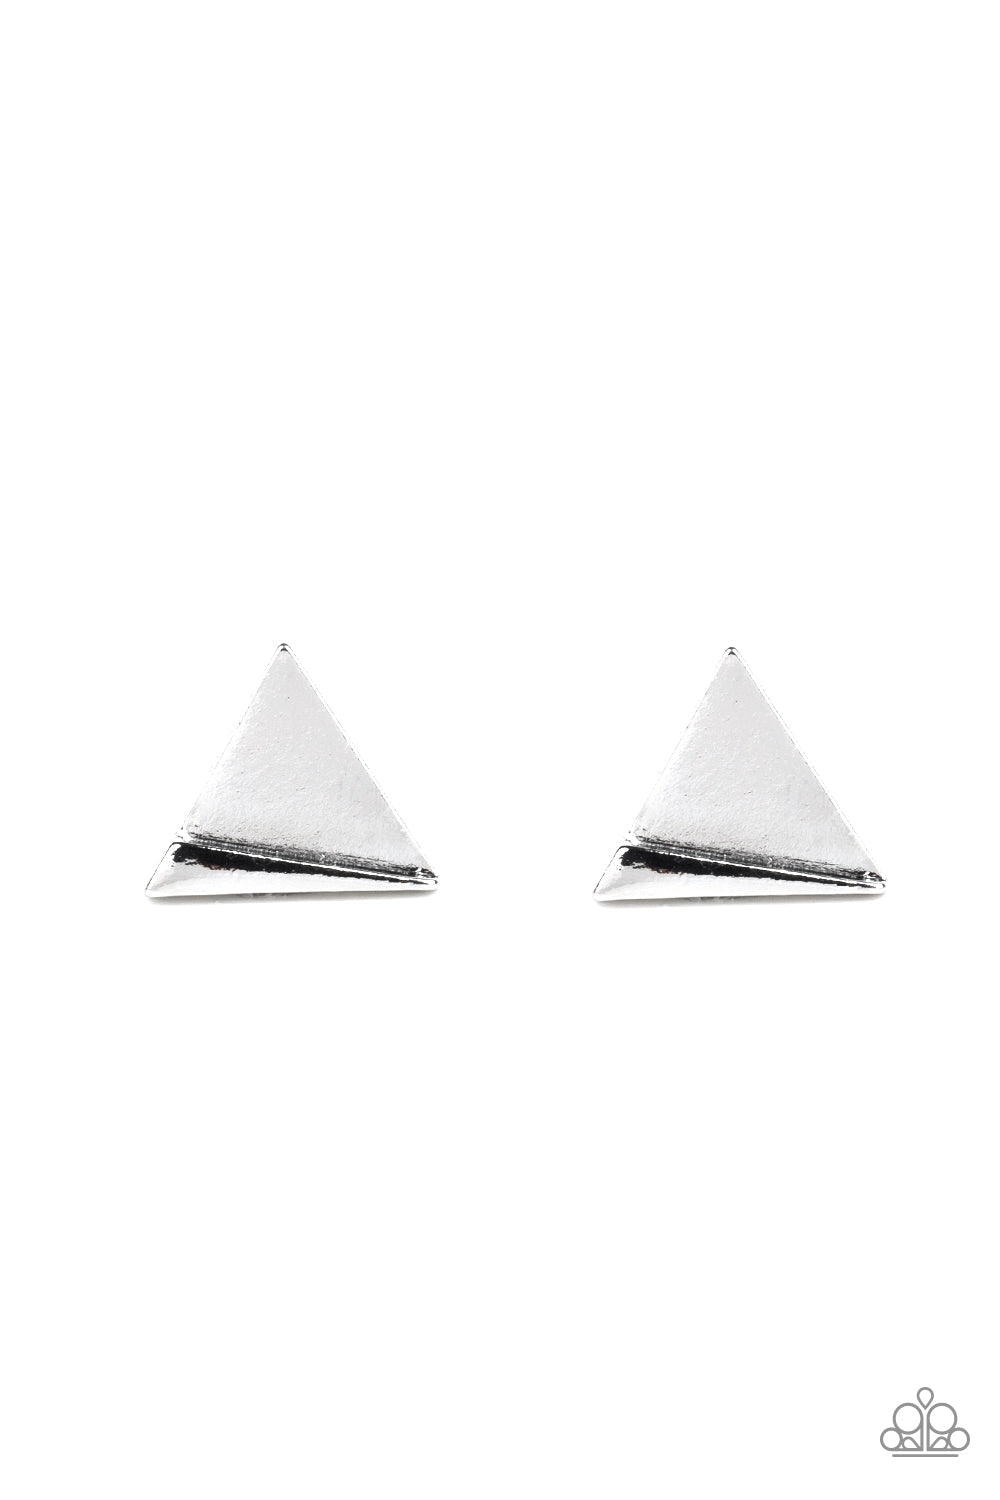 Die TRI-ing - Silver Earrings - Paparazzi Accessories - Trendy fashion jewelry for everyone - An angular frame is pressed into the bottom of a flat silver triangle, coalescing into an edgy frame. Earring attaches to a standard post fitting.